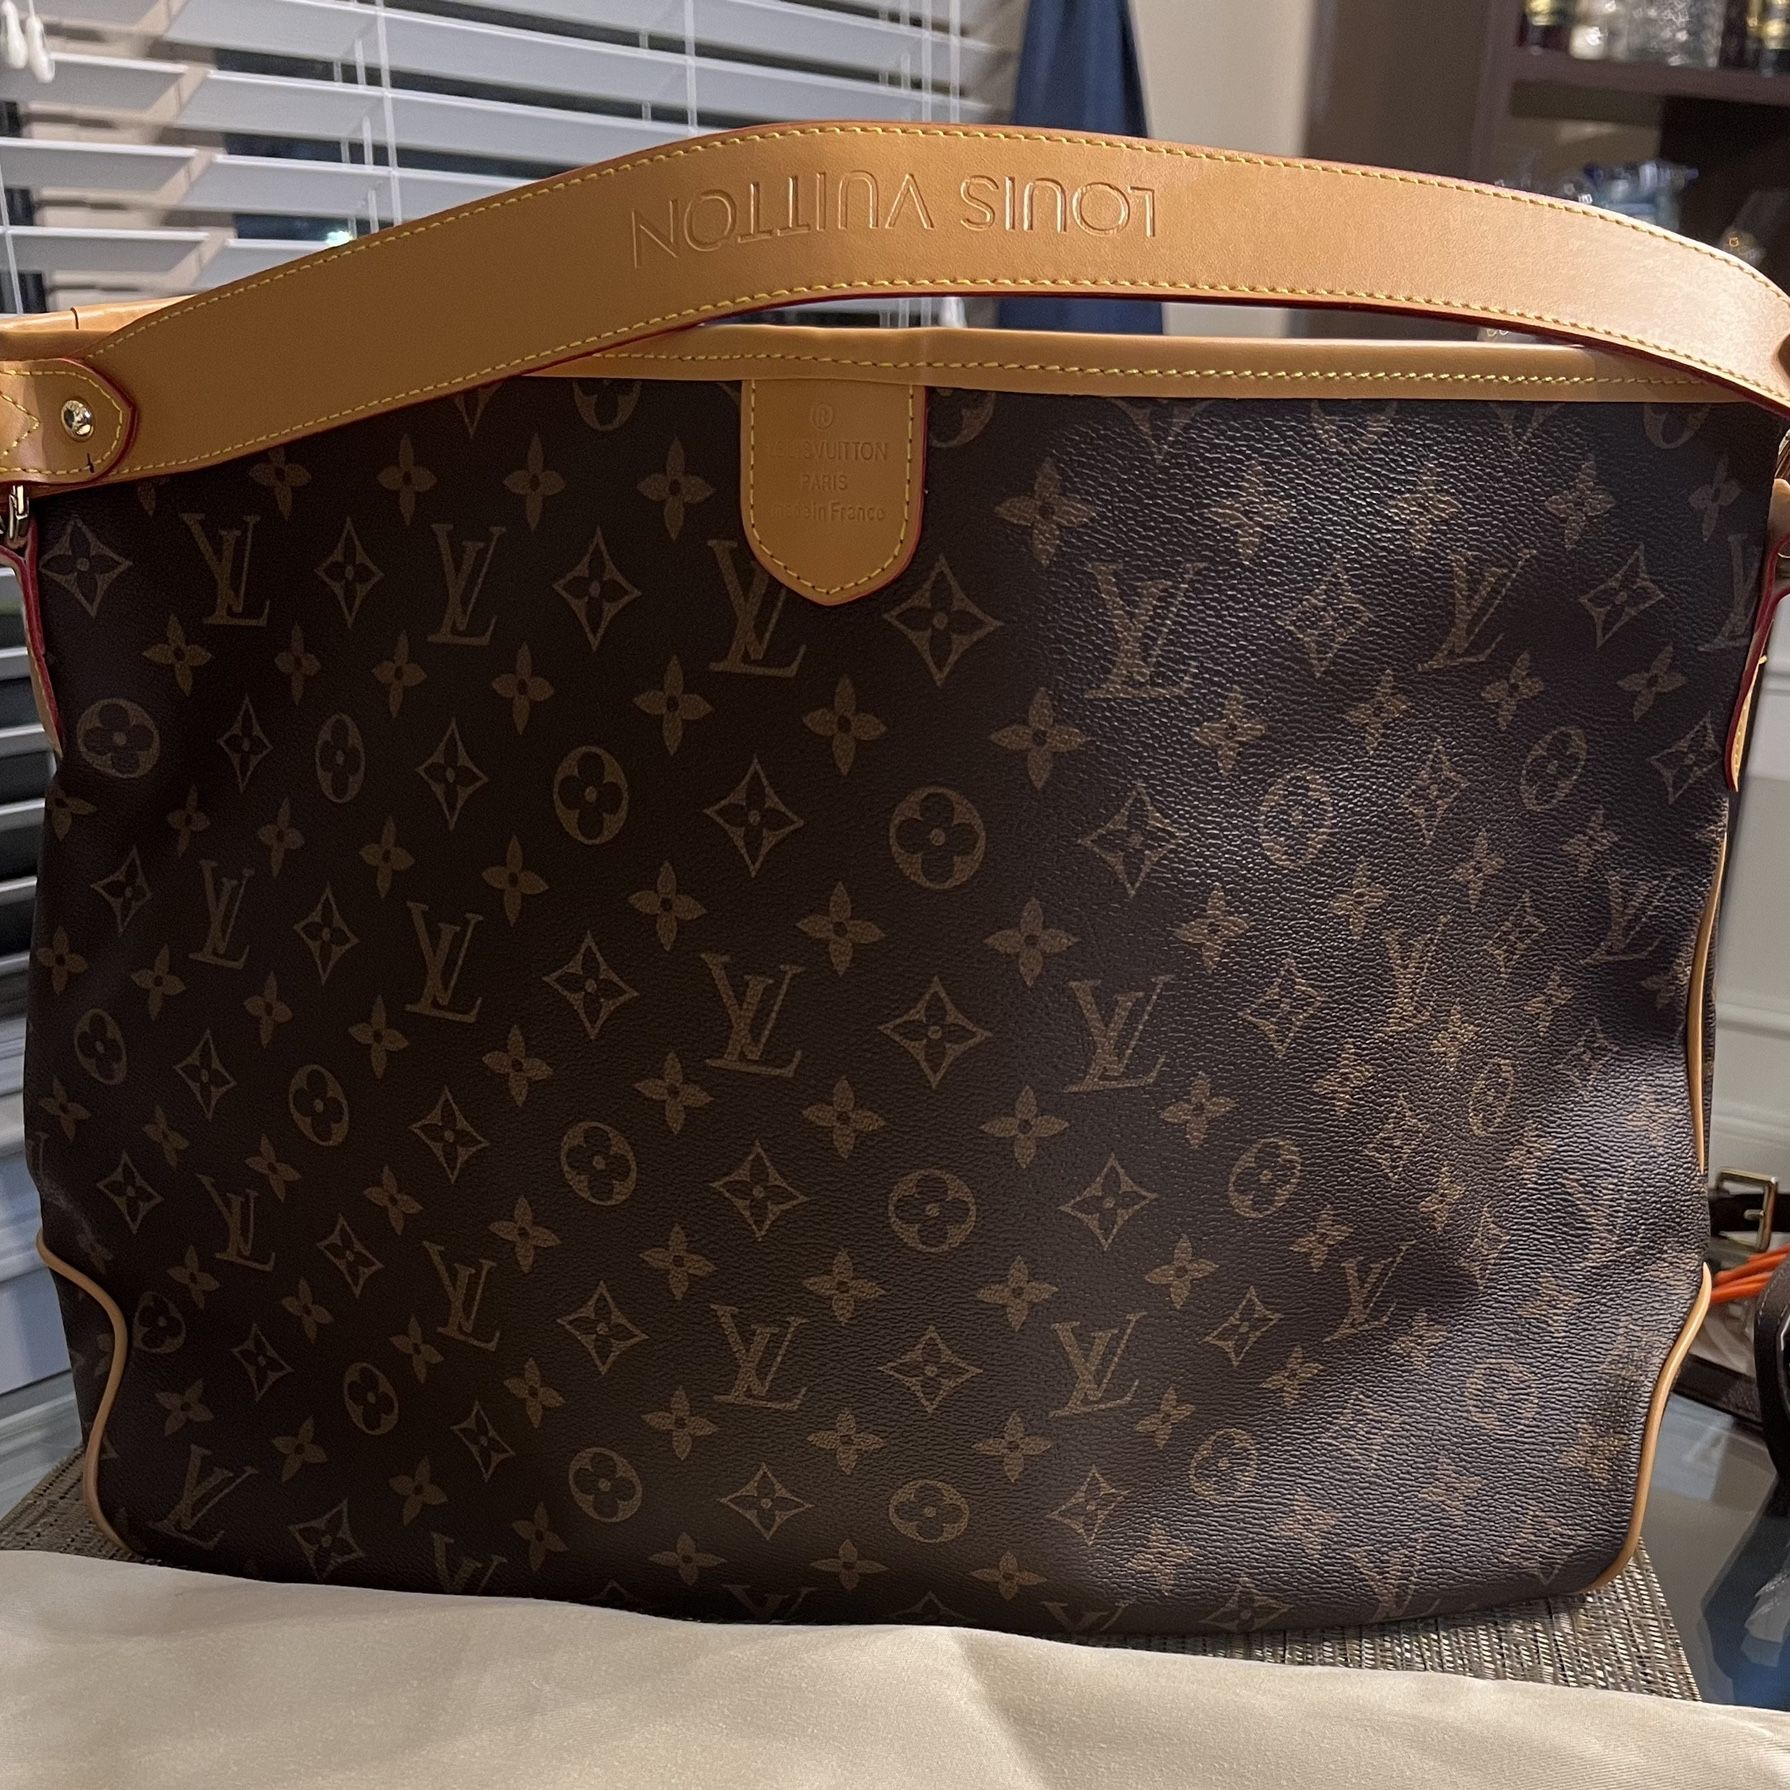 Louis Vuitton Luggage for Sale in Mcdonough, GA - OfferUp